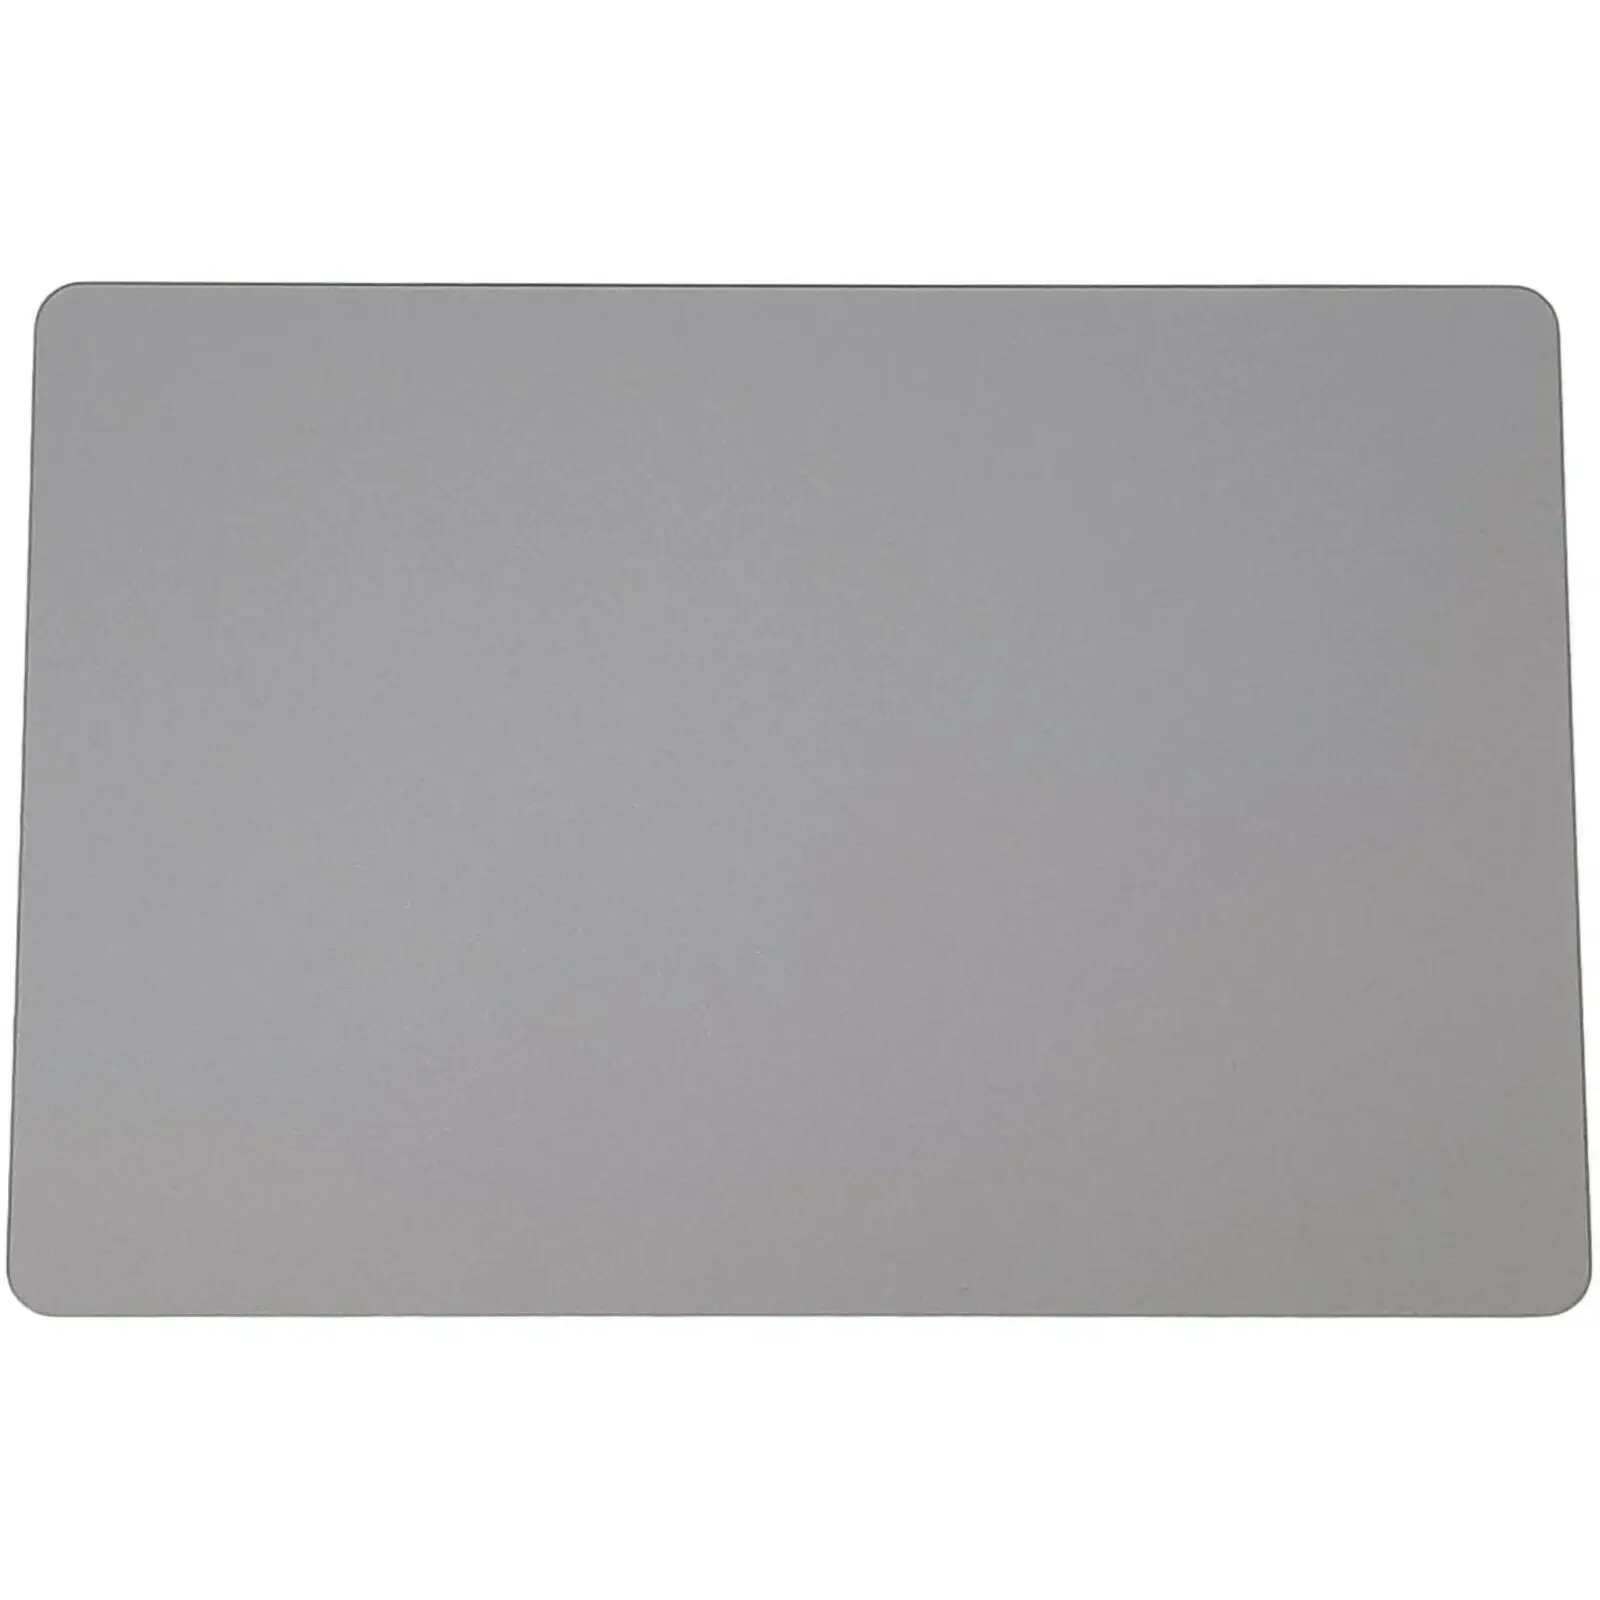 LCDOLED New laptop Trackpad Touchpad for Macbook Air 13" Retina A1932 Trackpad Touch pad Space gray grey/Silver/Gold Color 2018